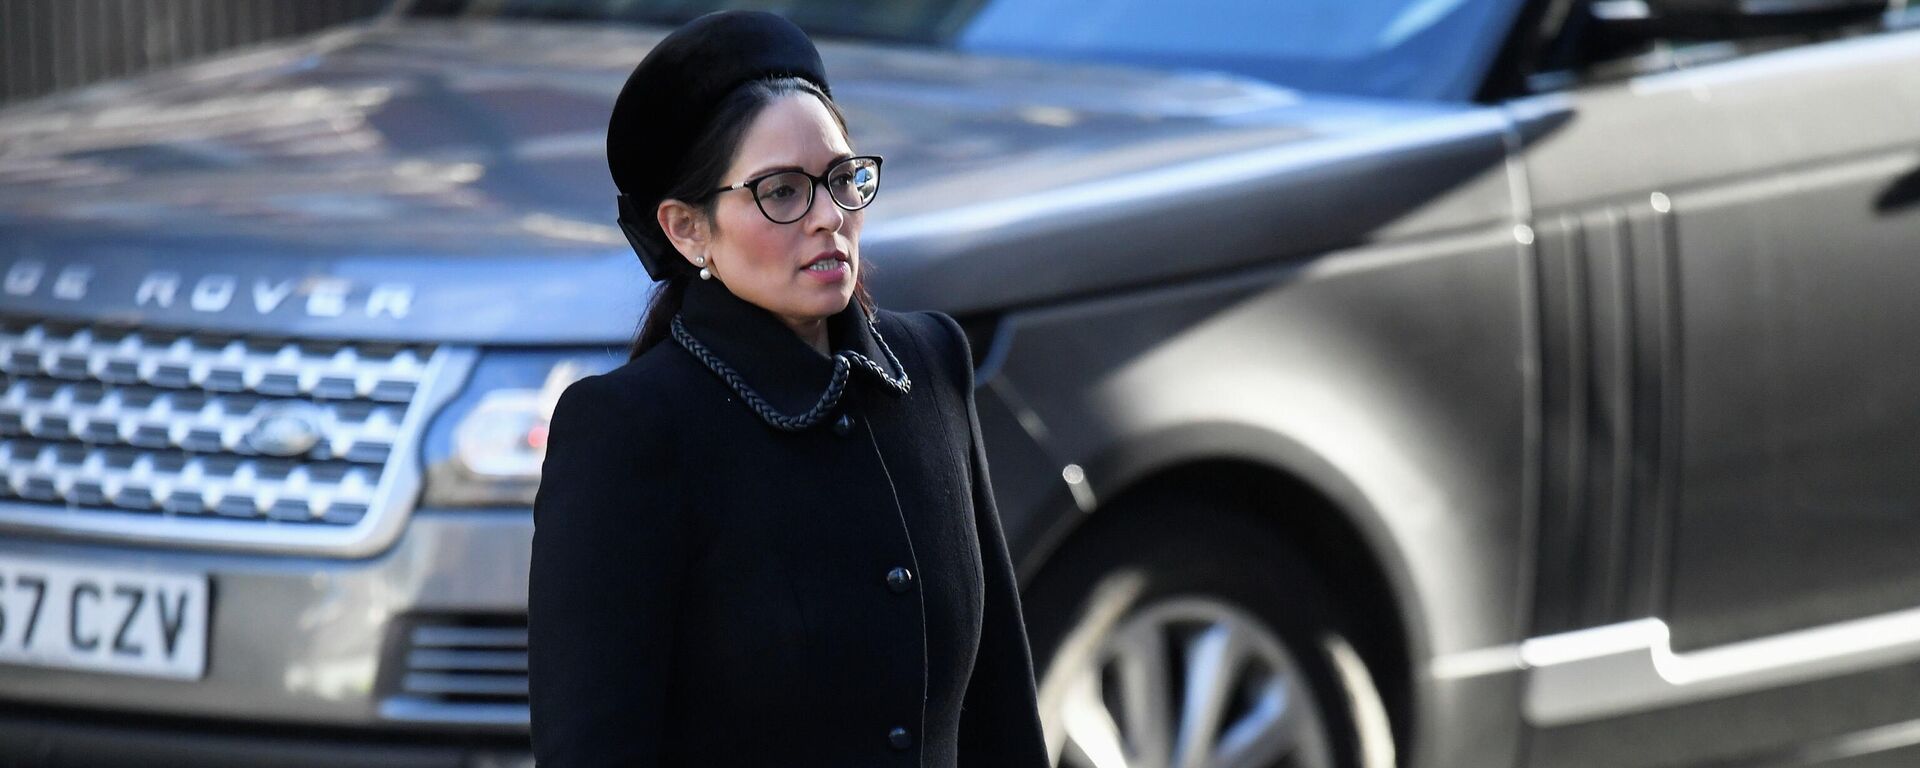 Britain's Home Secretary Priti Patel arrives for the remembrance mass of MP David Amess, who was stabbed to death during a meeting with constituents, at Westminster Cathedral in London, Britain, November 23, 2021. REUTERS/Toby Melville - Sputnik International, 1920, 29.11.2021